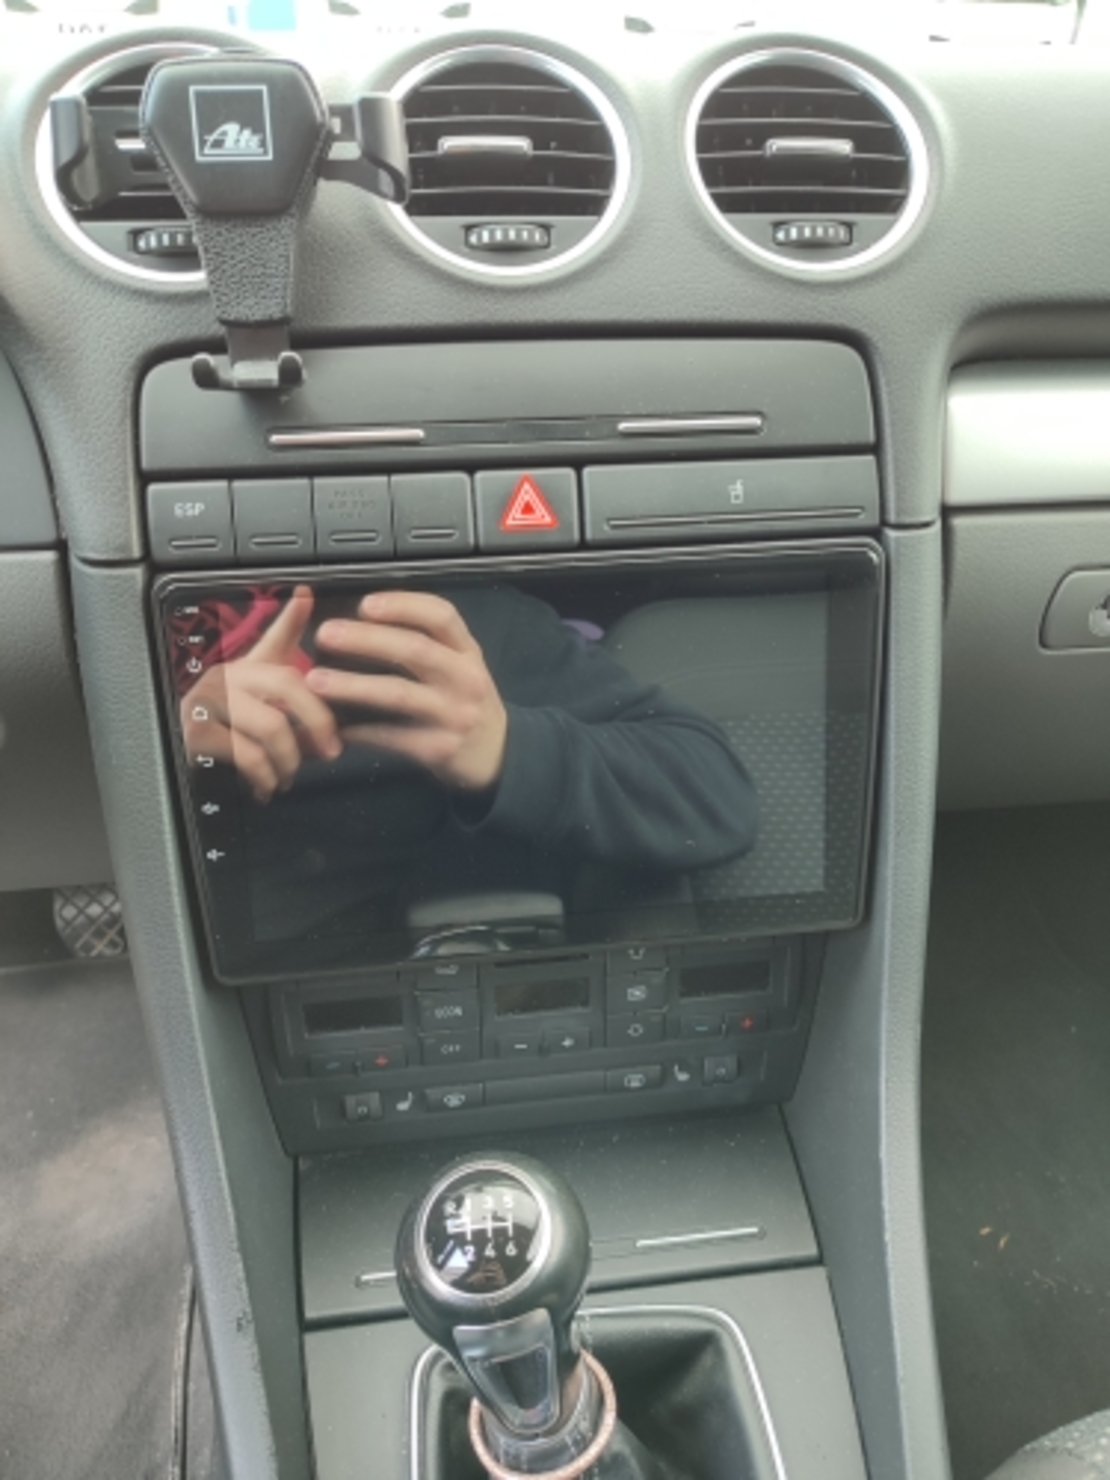 Audi A4 2002- 2008 Android Multimedia/Navigation